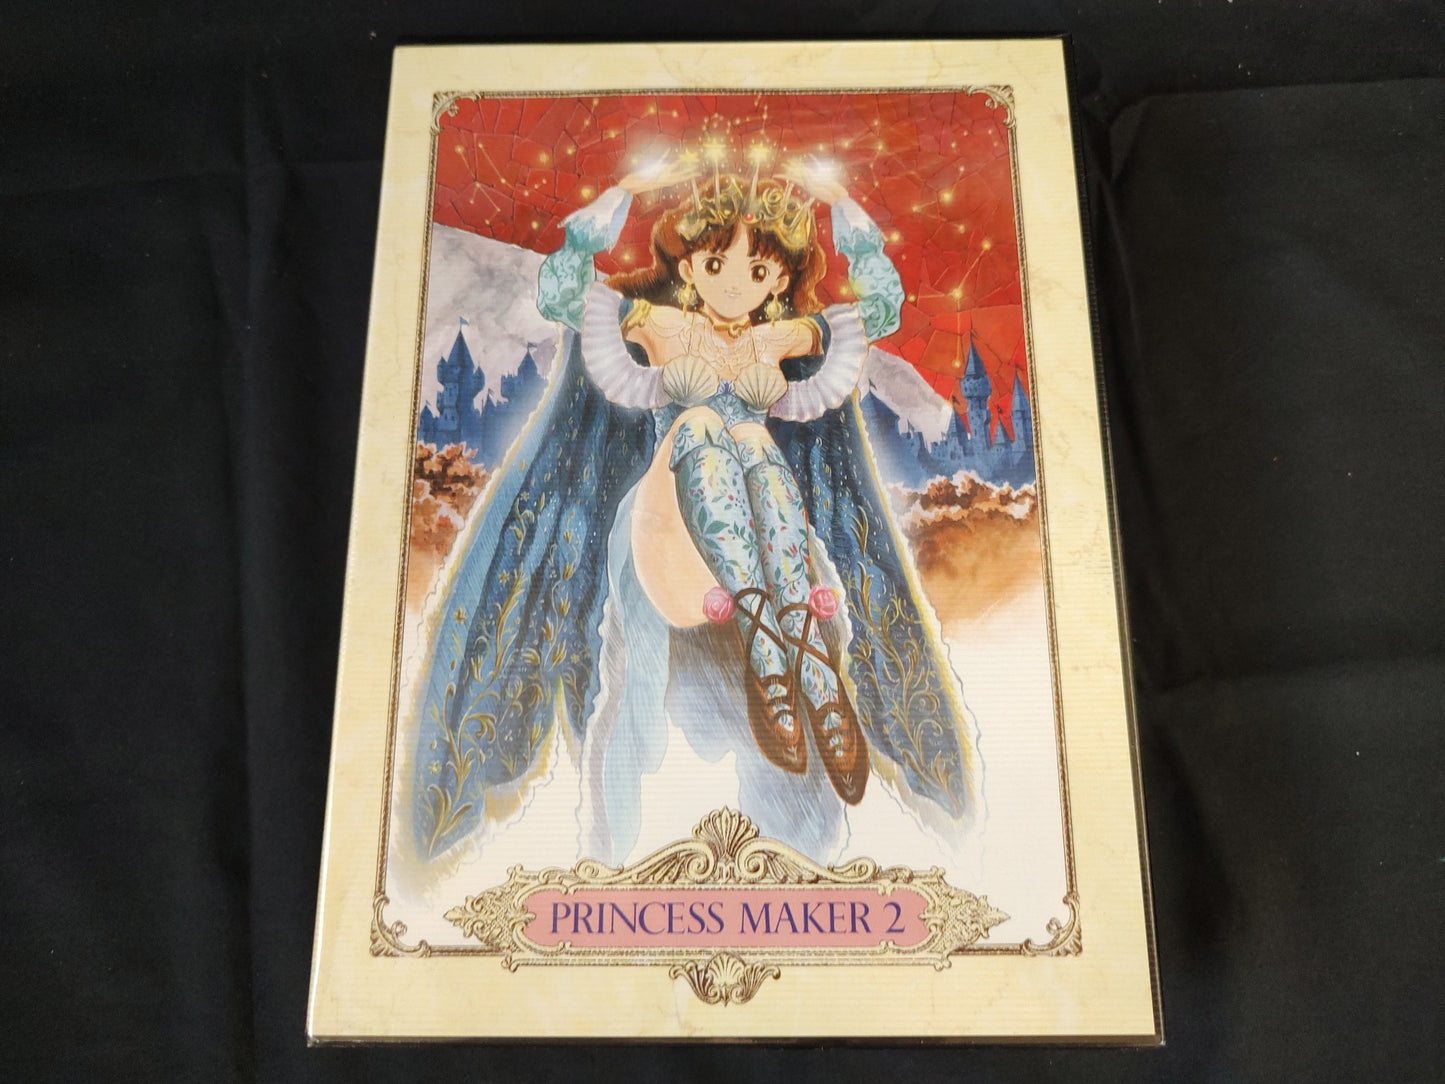 PC-9801 PC98 Princess Maker 2 Game FDDs w/Manual and Box set, Working-f0903-